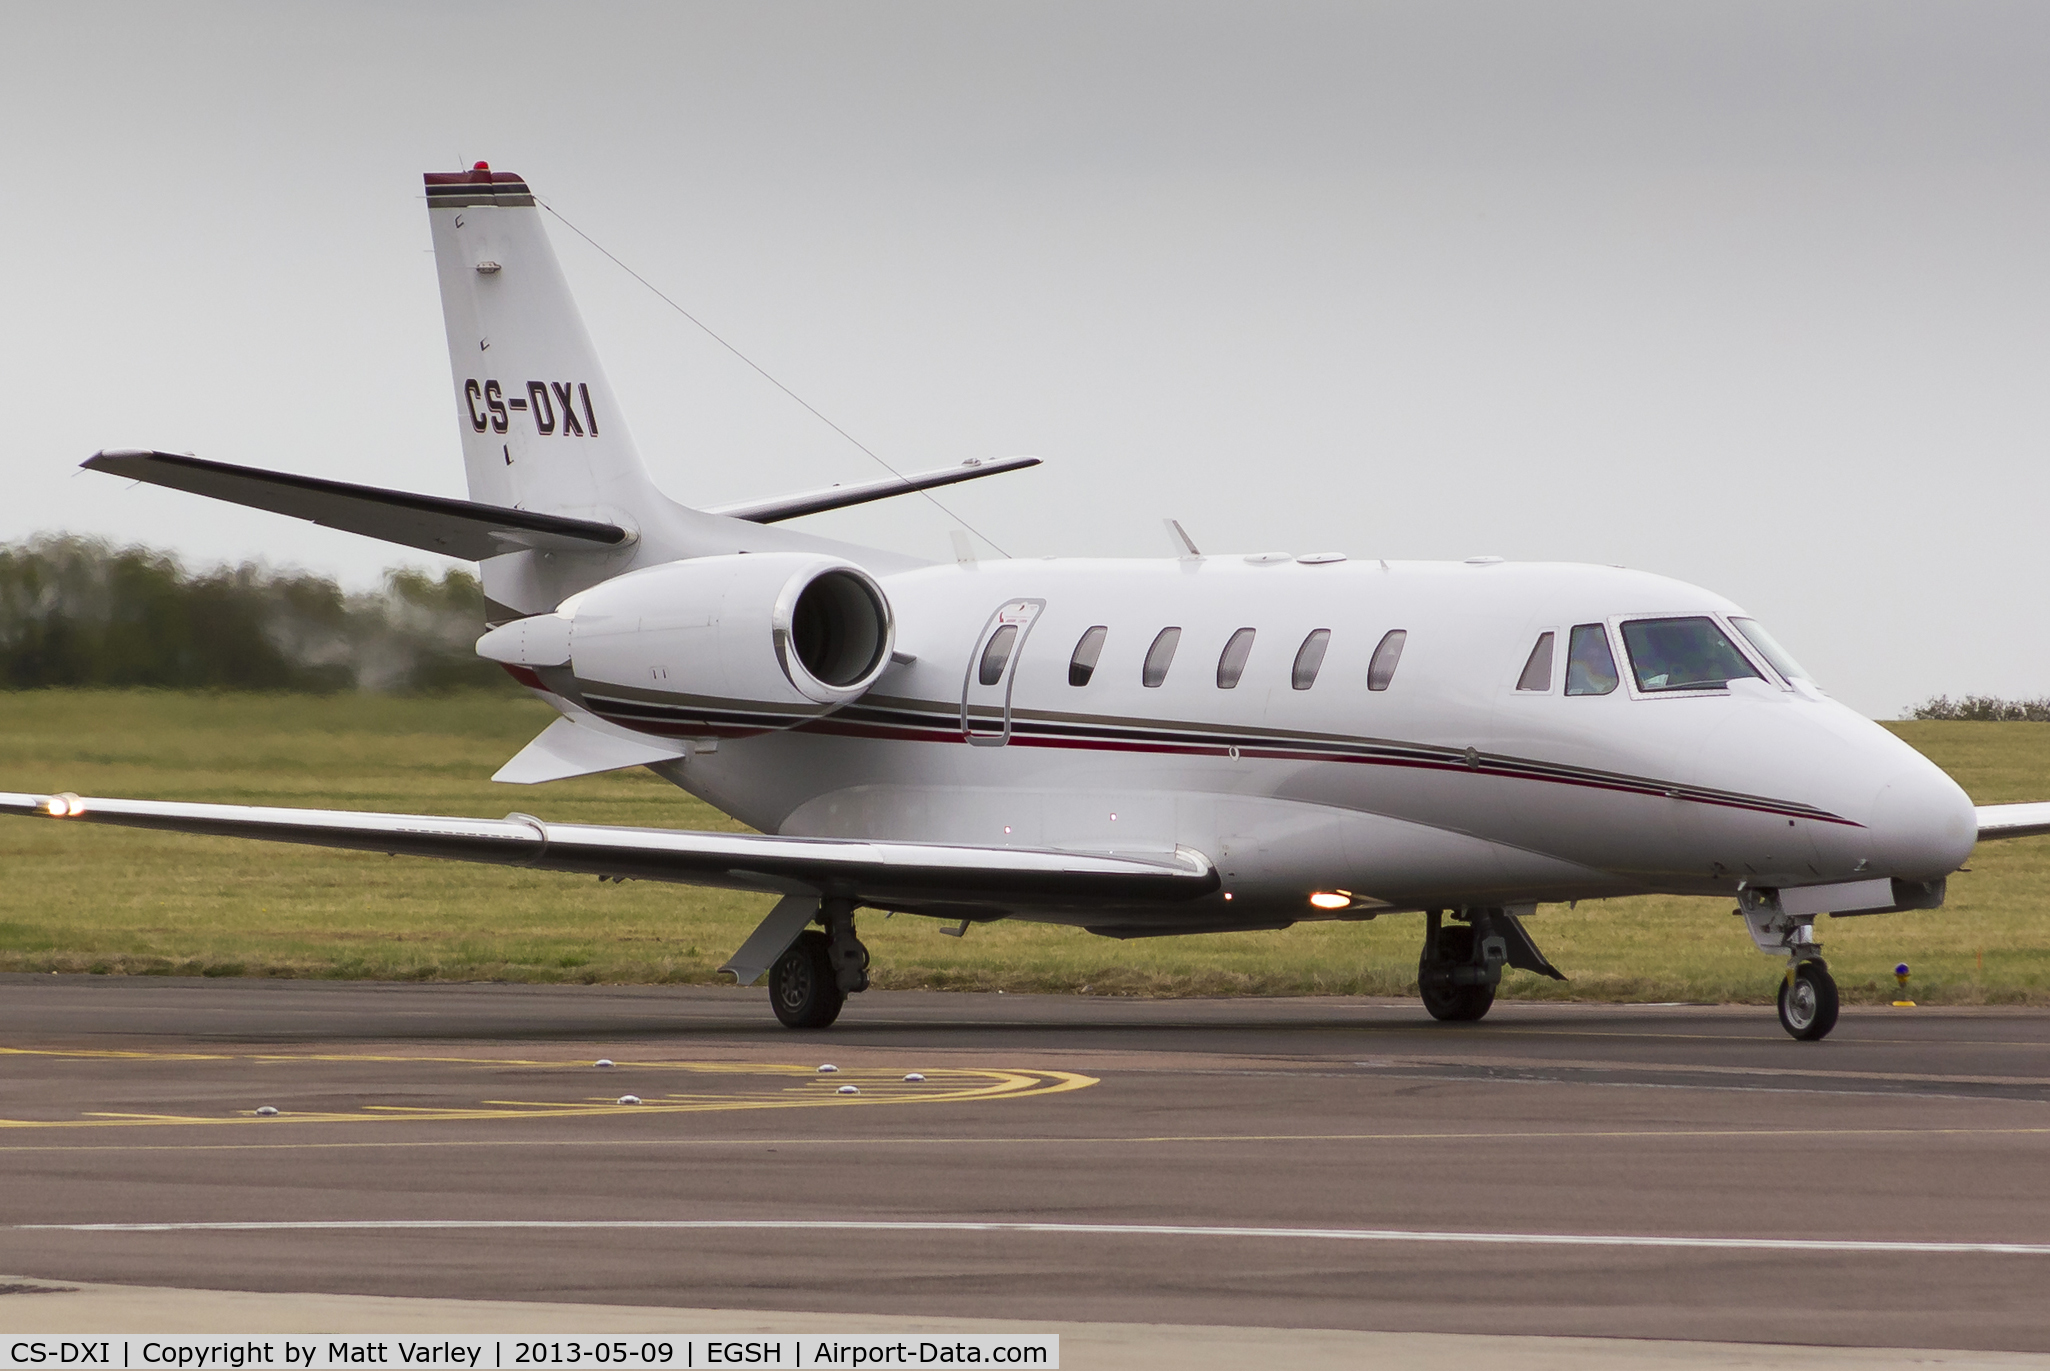 CS-DXI, 2006 Cessna 560 Citation XLS C/N 560-5621, Arriving at a dull SaxonAir after performing a go around due to high winds.